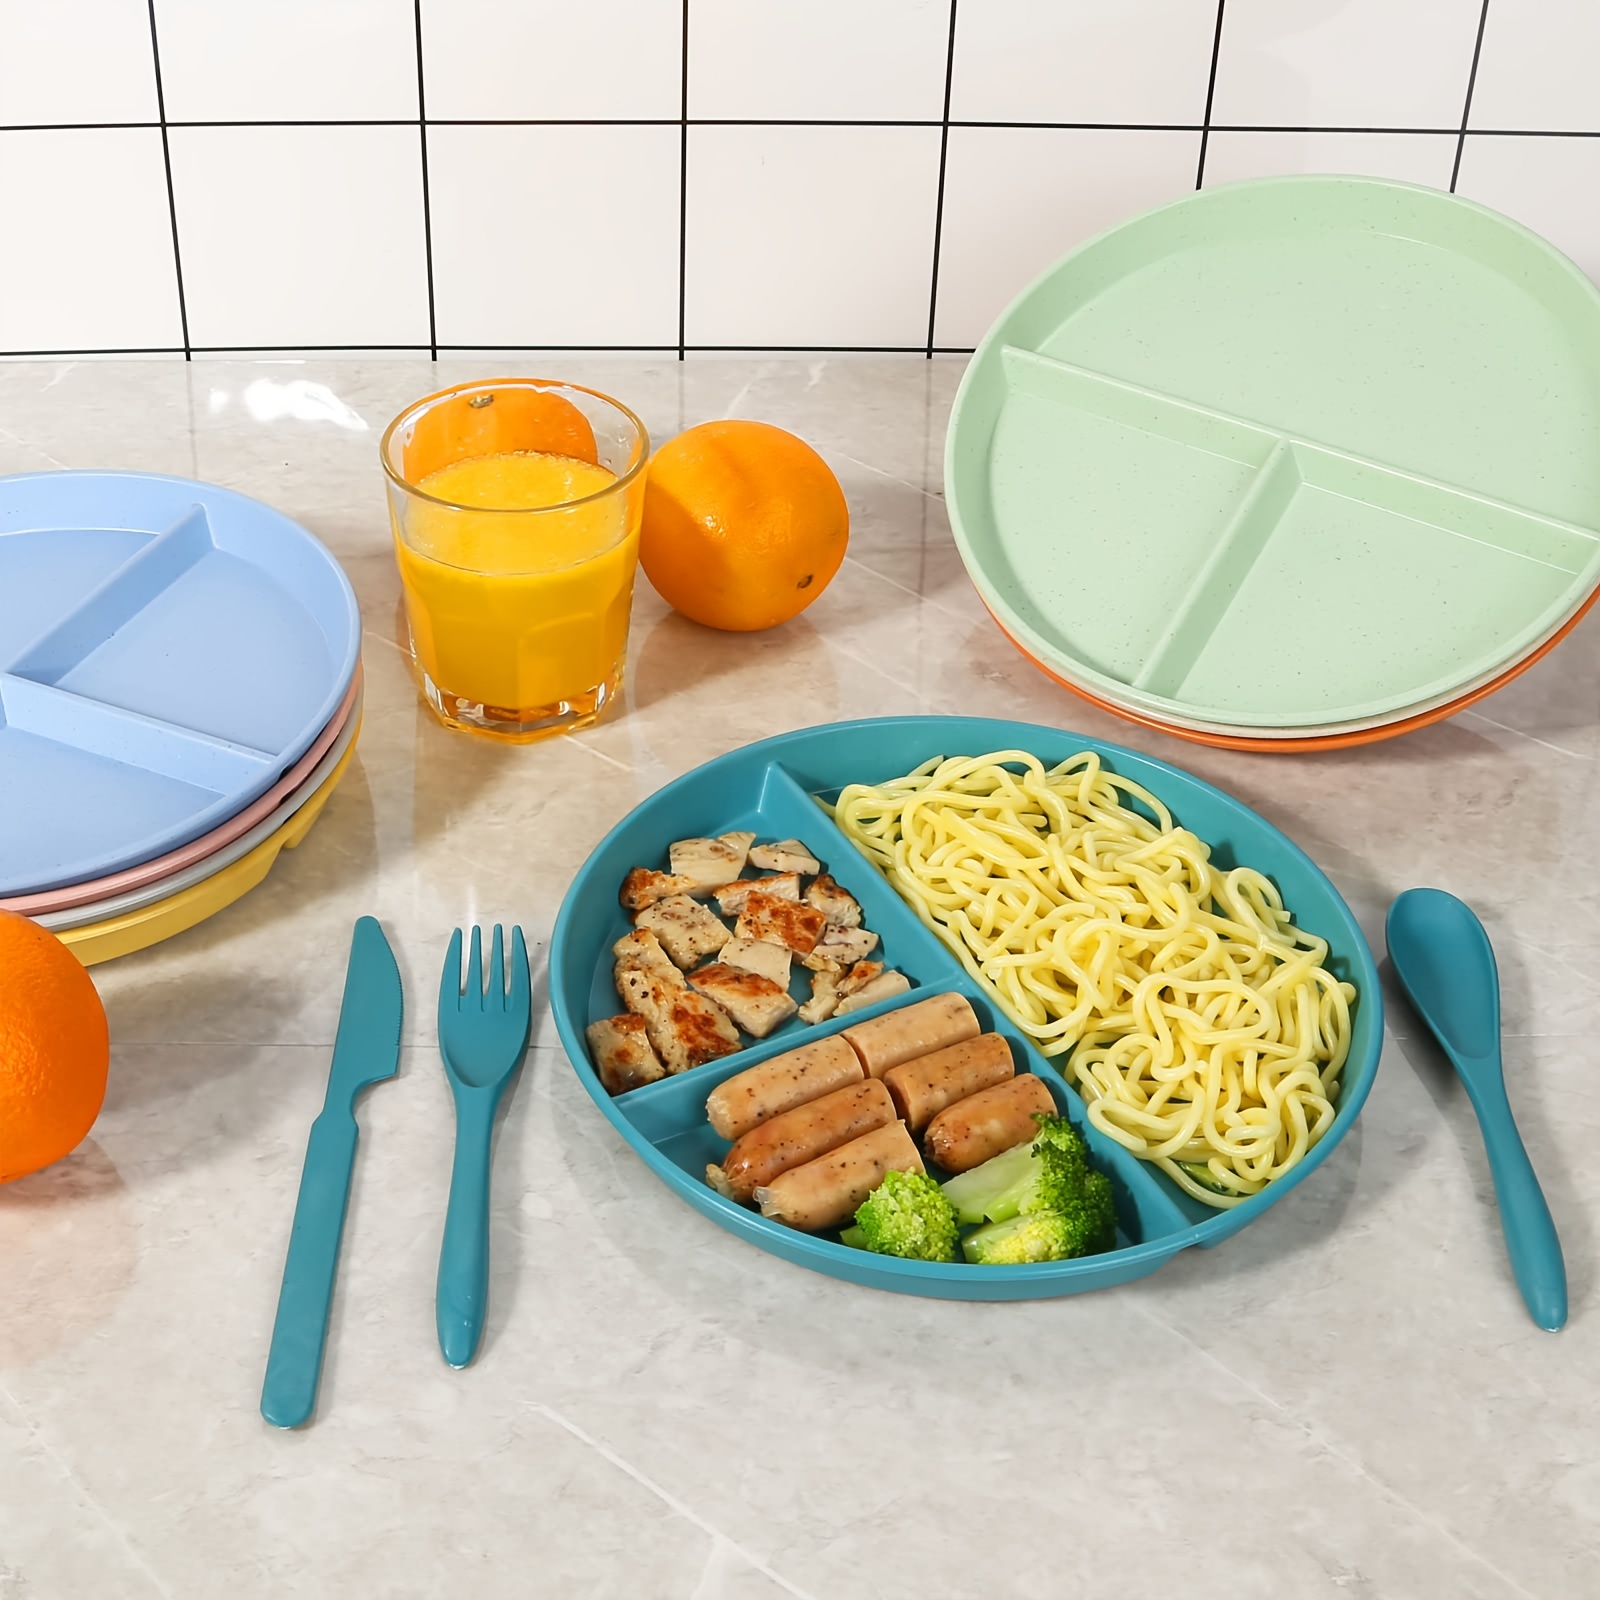 Healthy Portion Control Plate BPA Free 3-Section w Lid Dishwasher